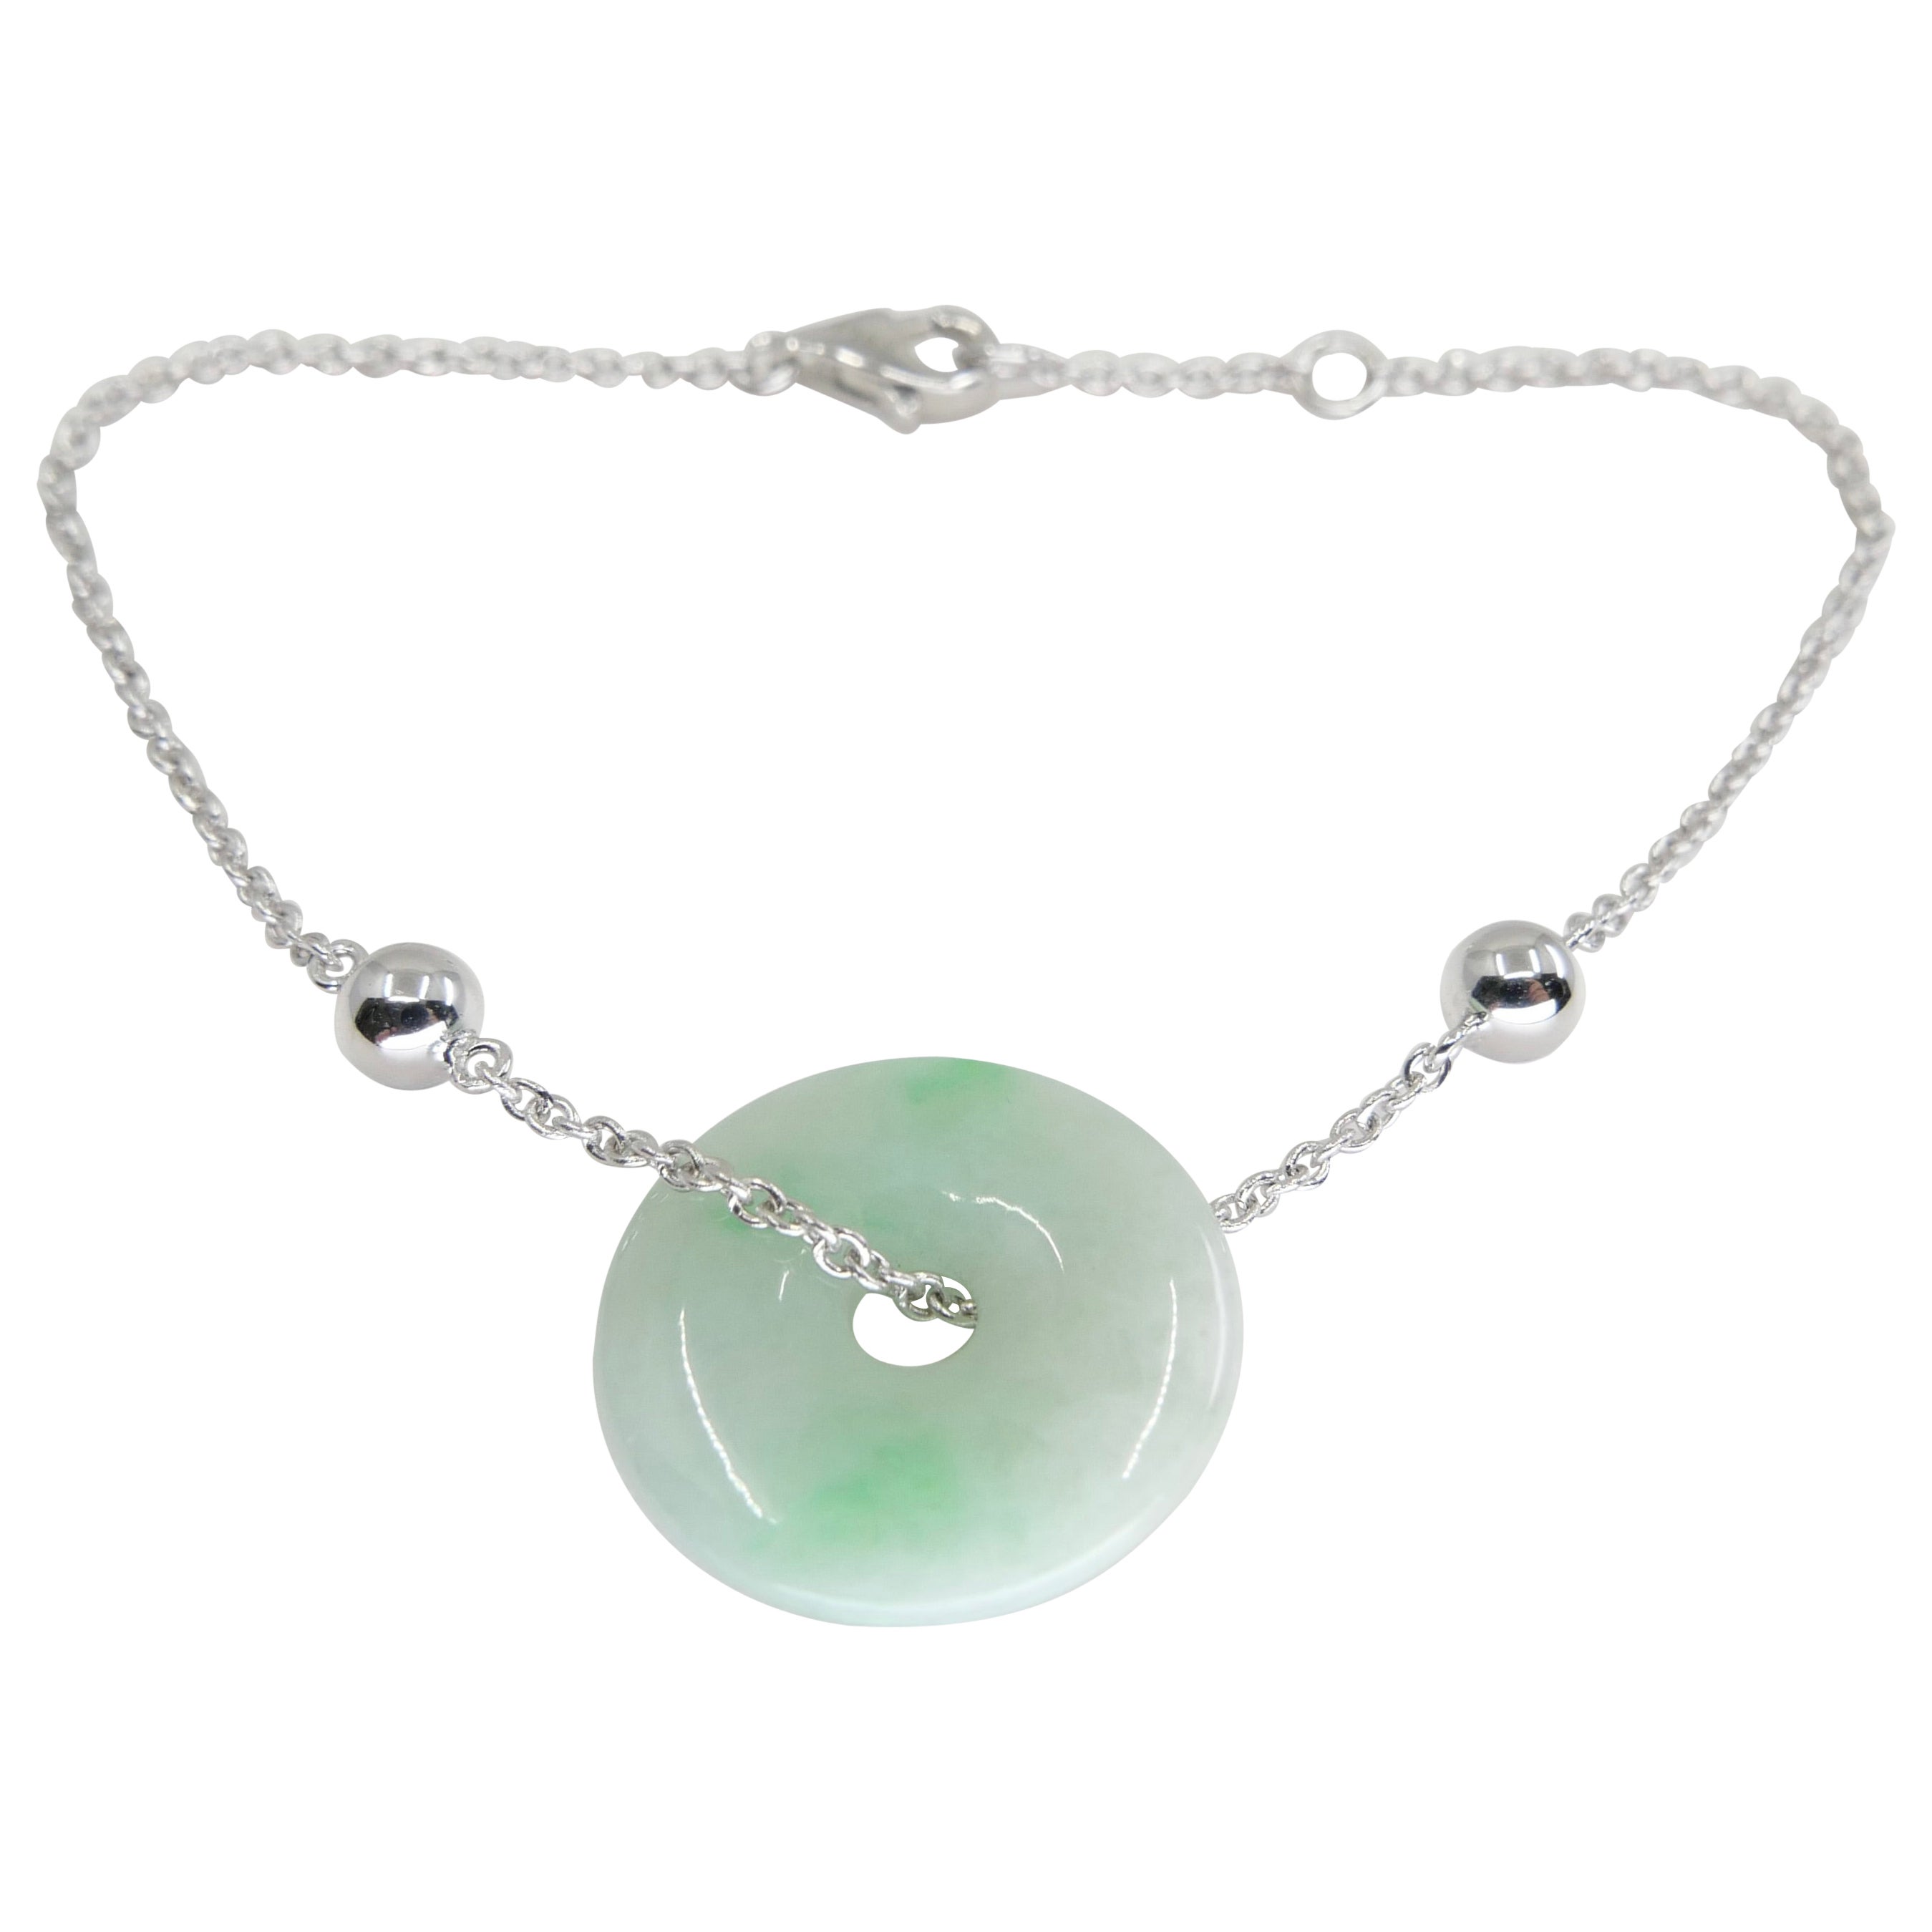 Certified 6.94 Cts Lucky Jade & White Gold Bracelet, Patches of Apple Green For Sale